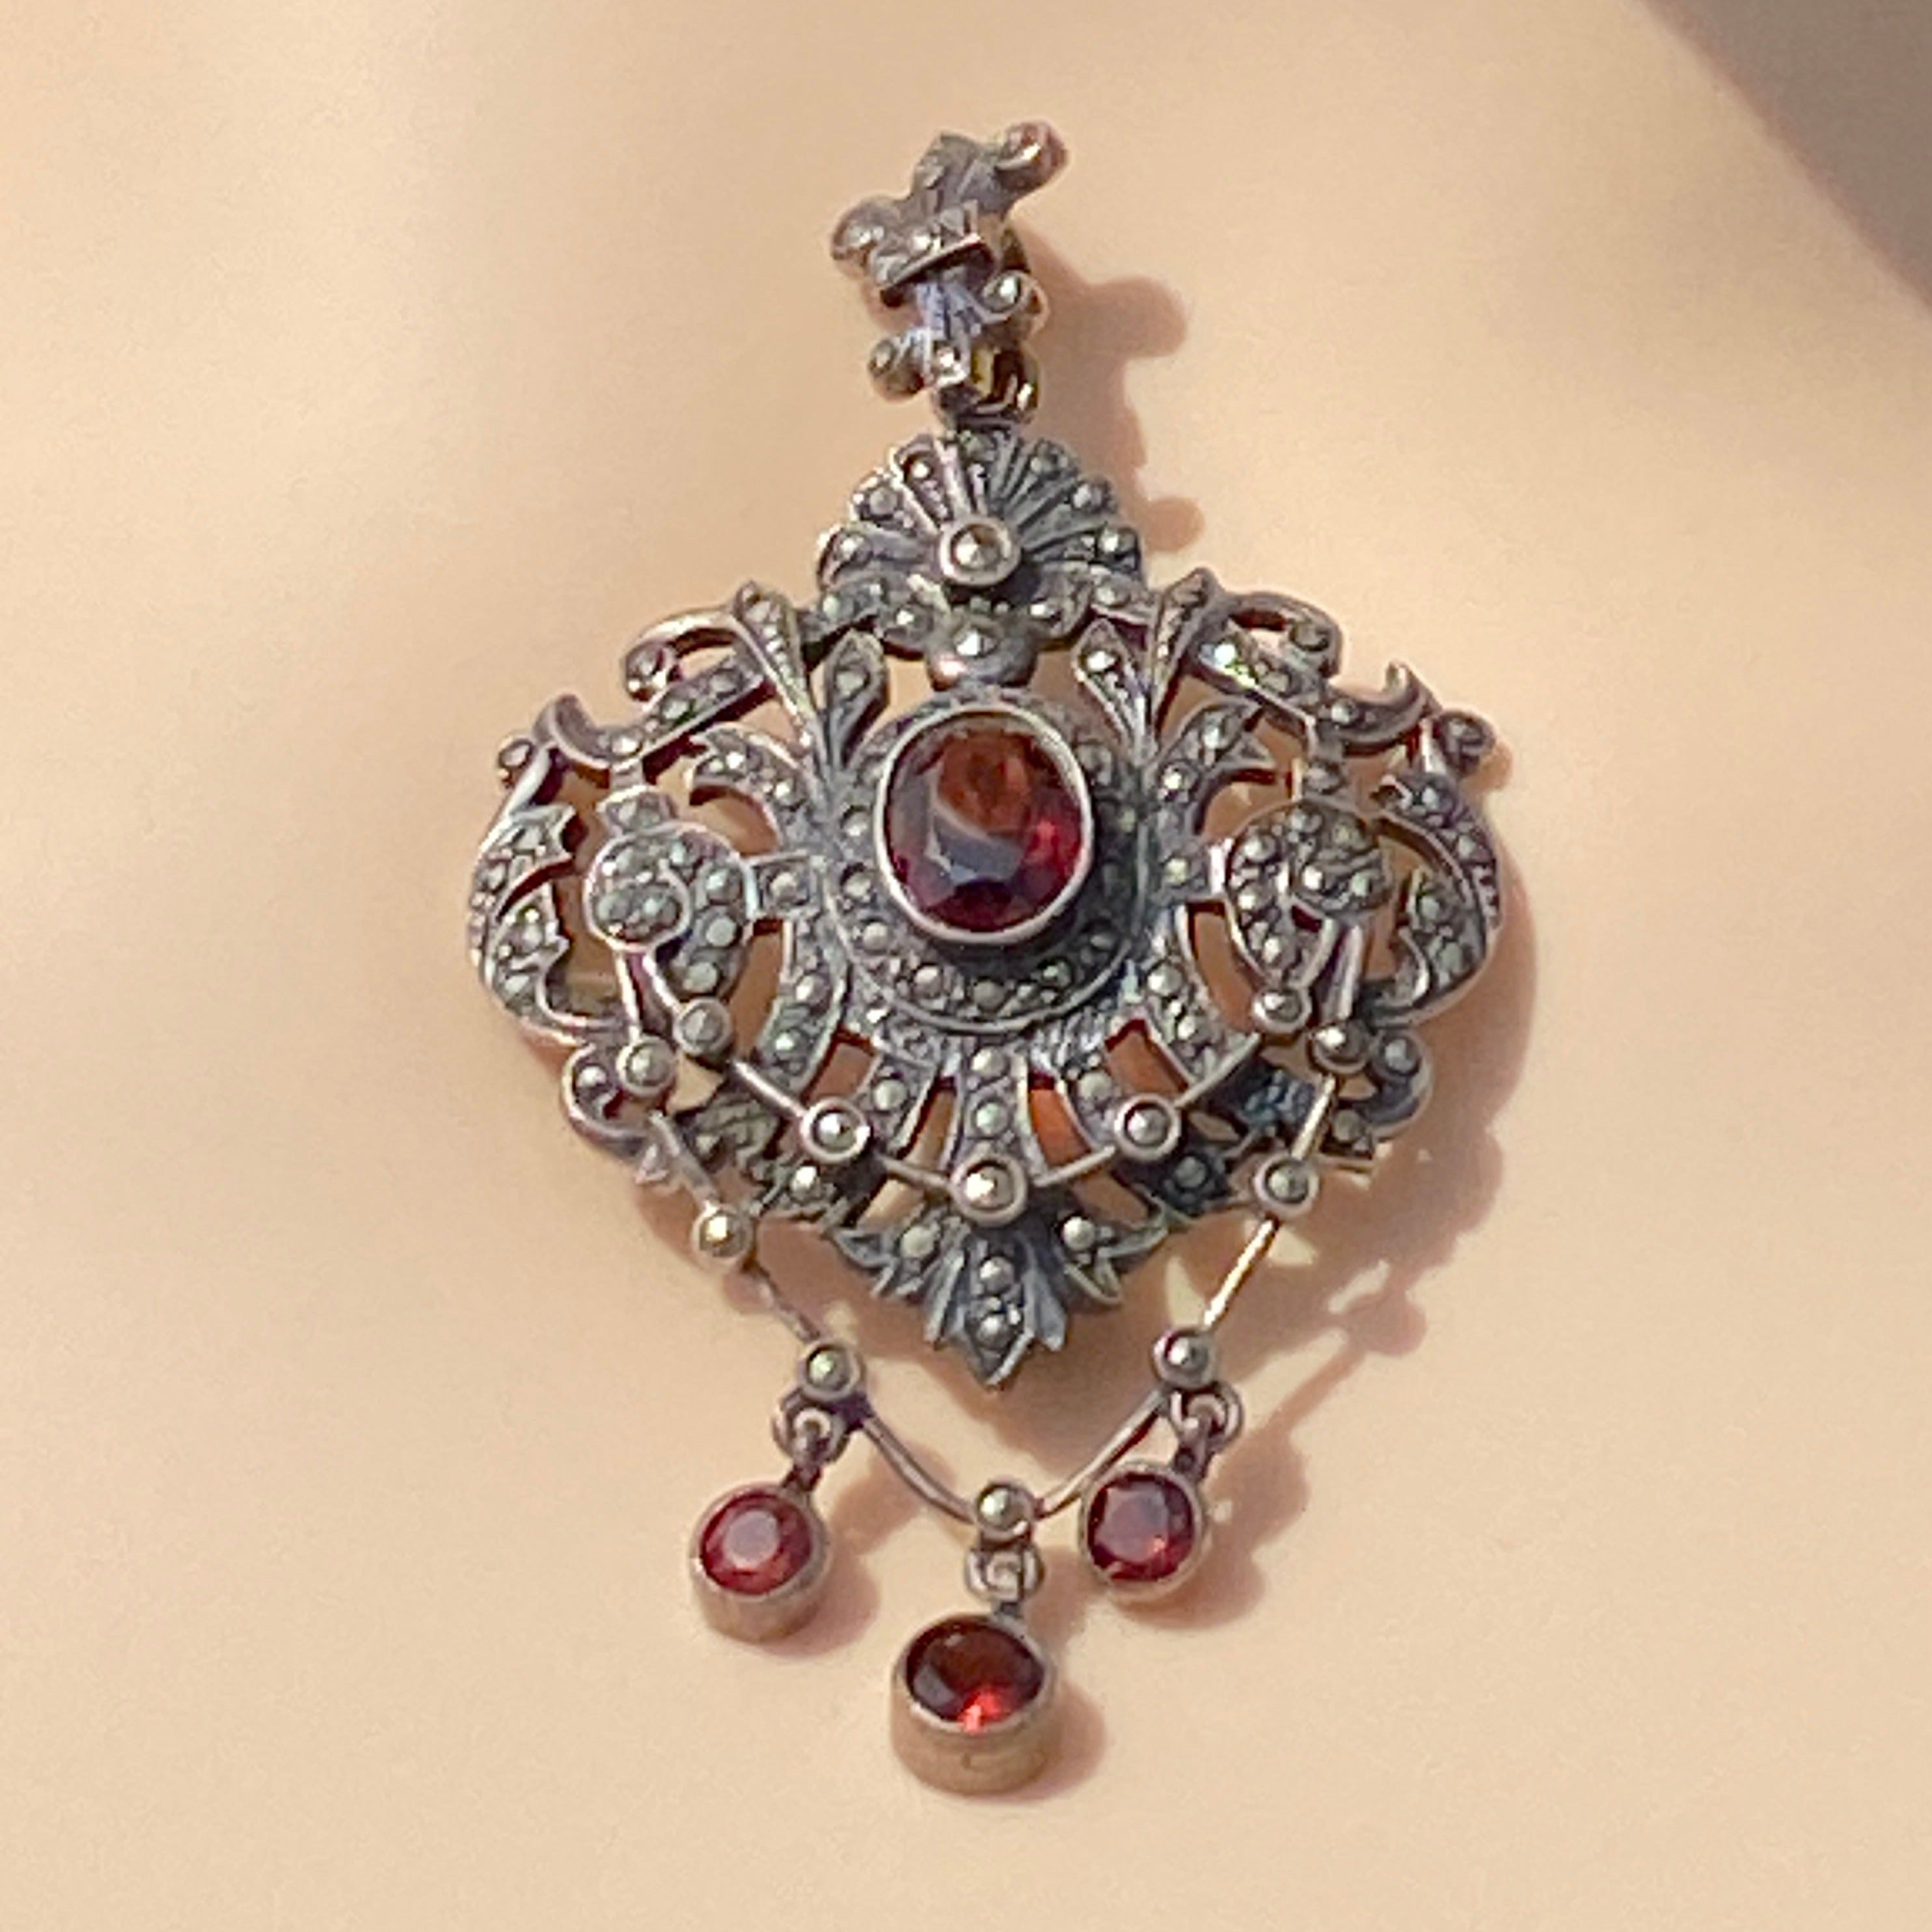 Gothic Pendant Brooch Set With Garnets & Marcasite.